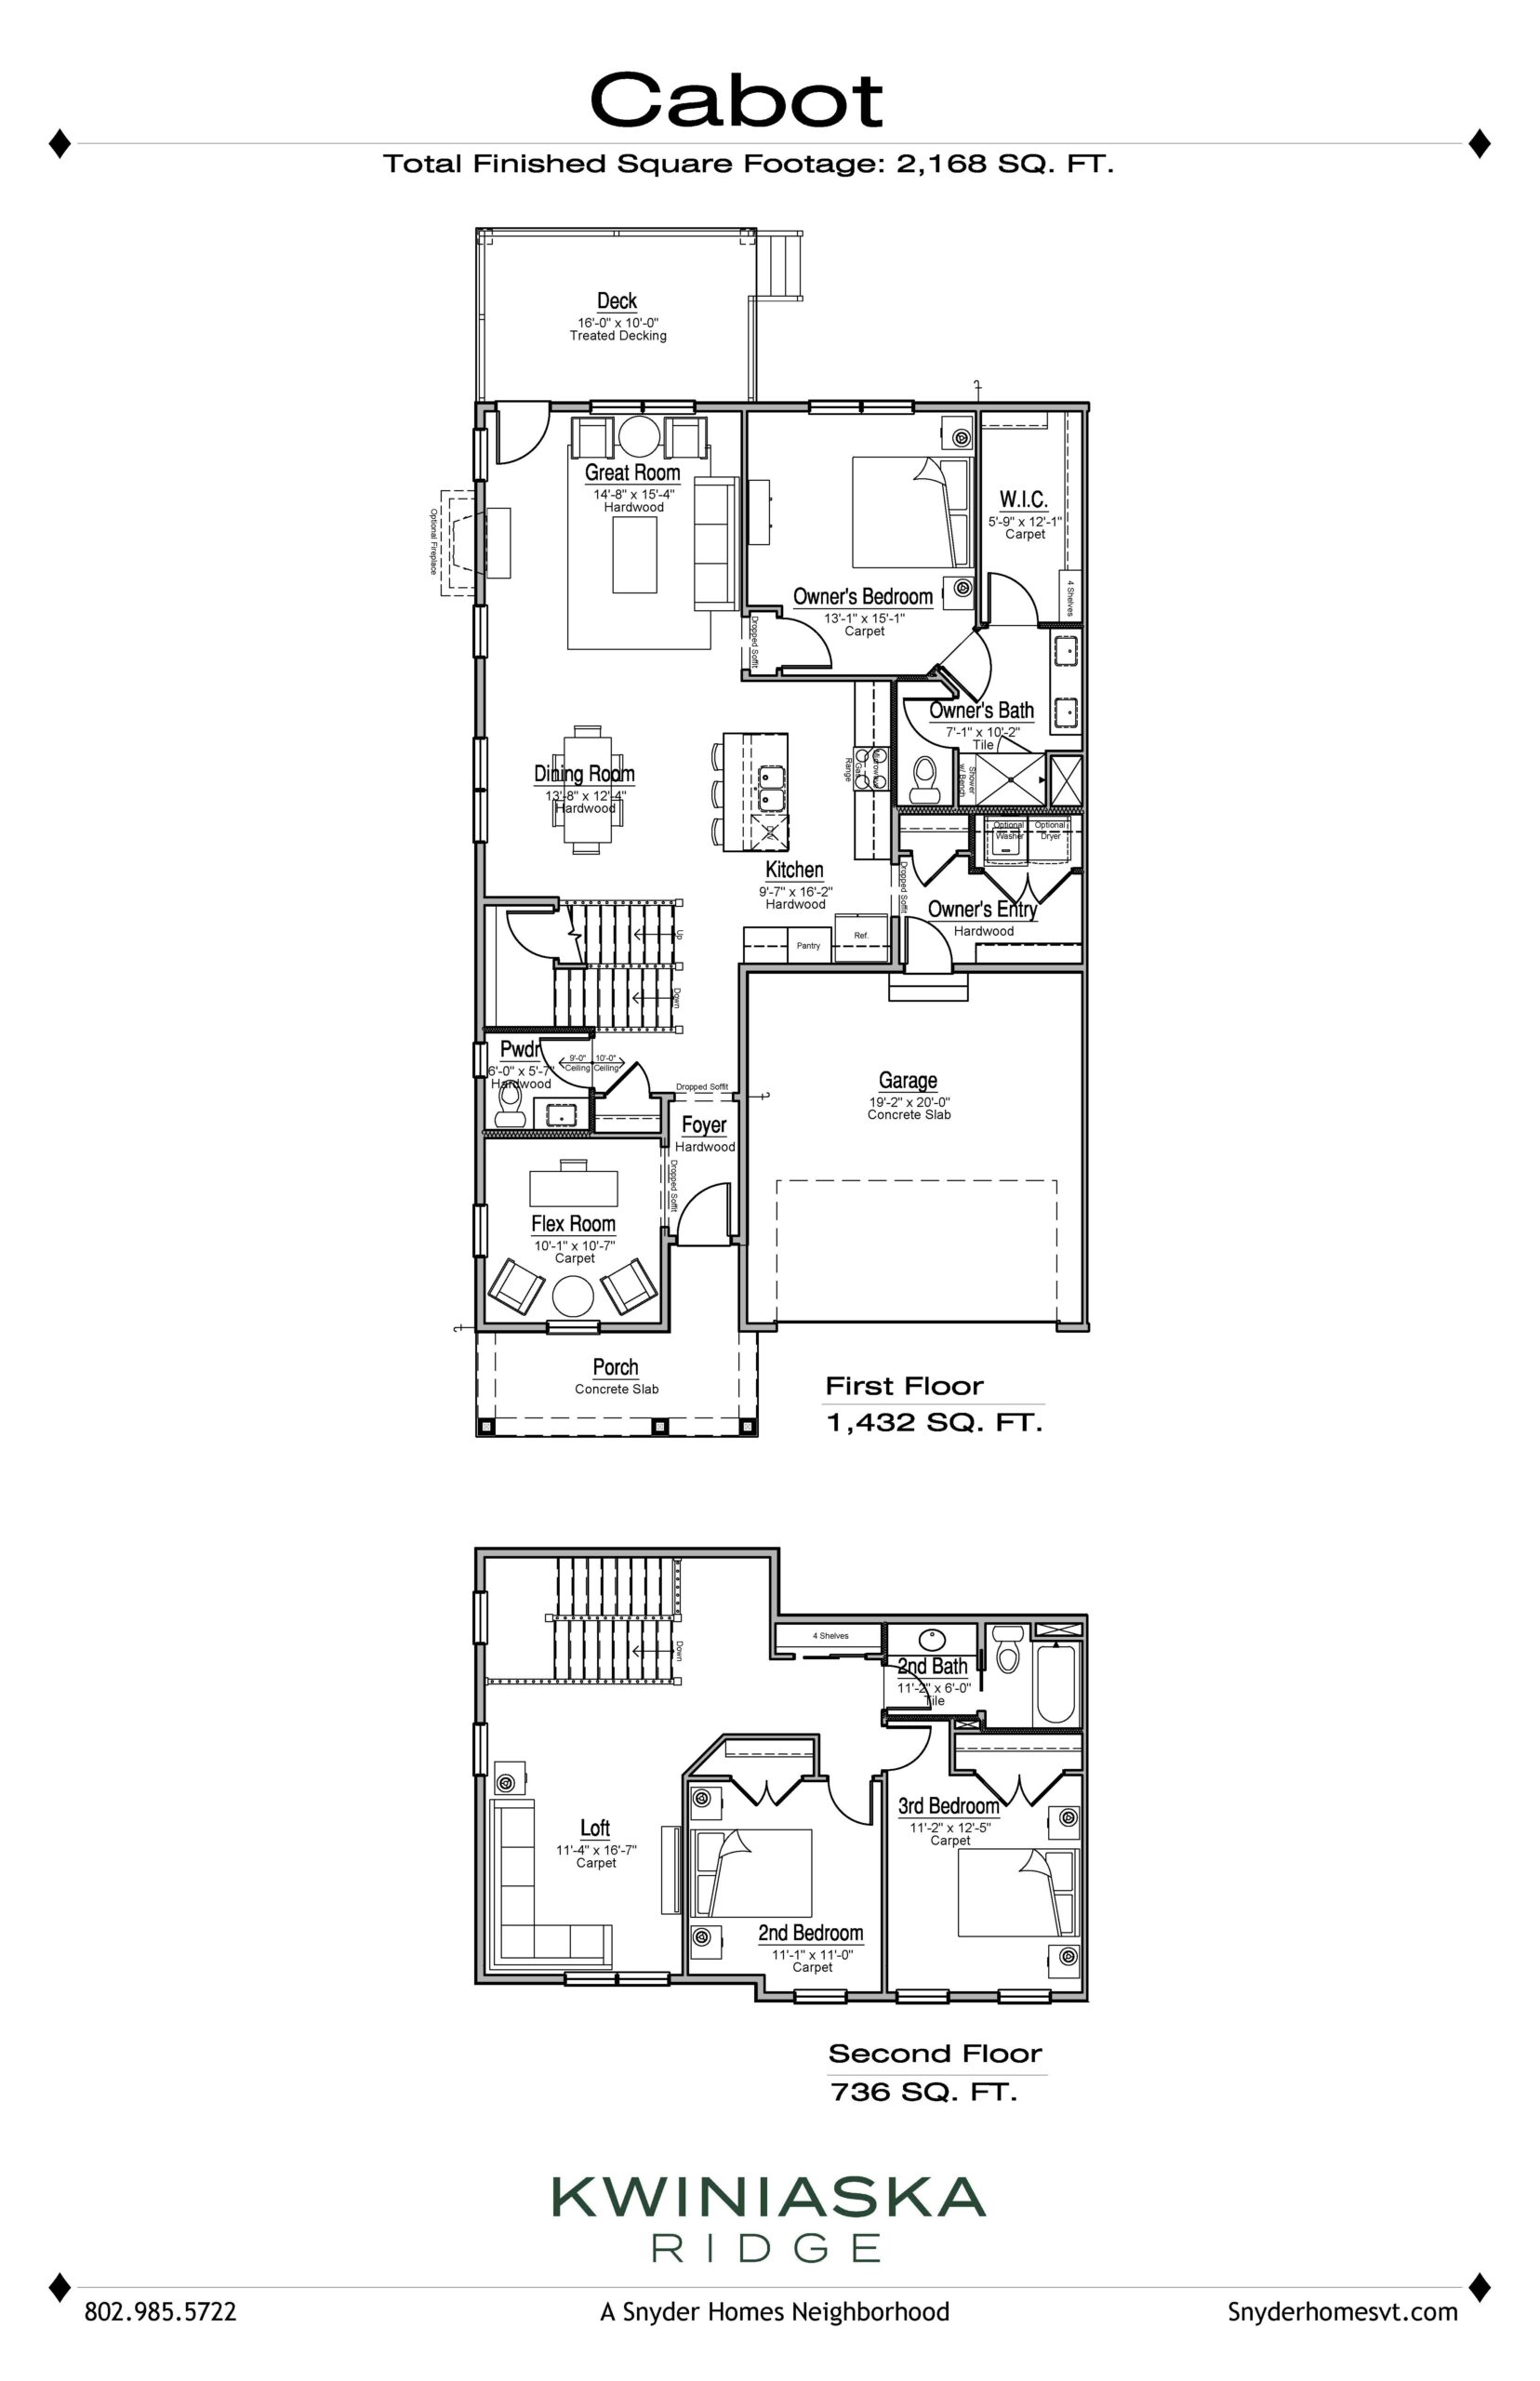 Architectural floor plan of "cabot" model home at kwinaska ridge, featuring a three-level layout with detailed room designations and total square footage.